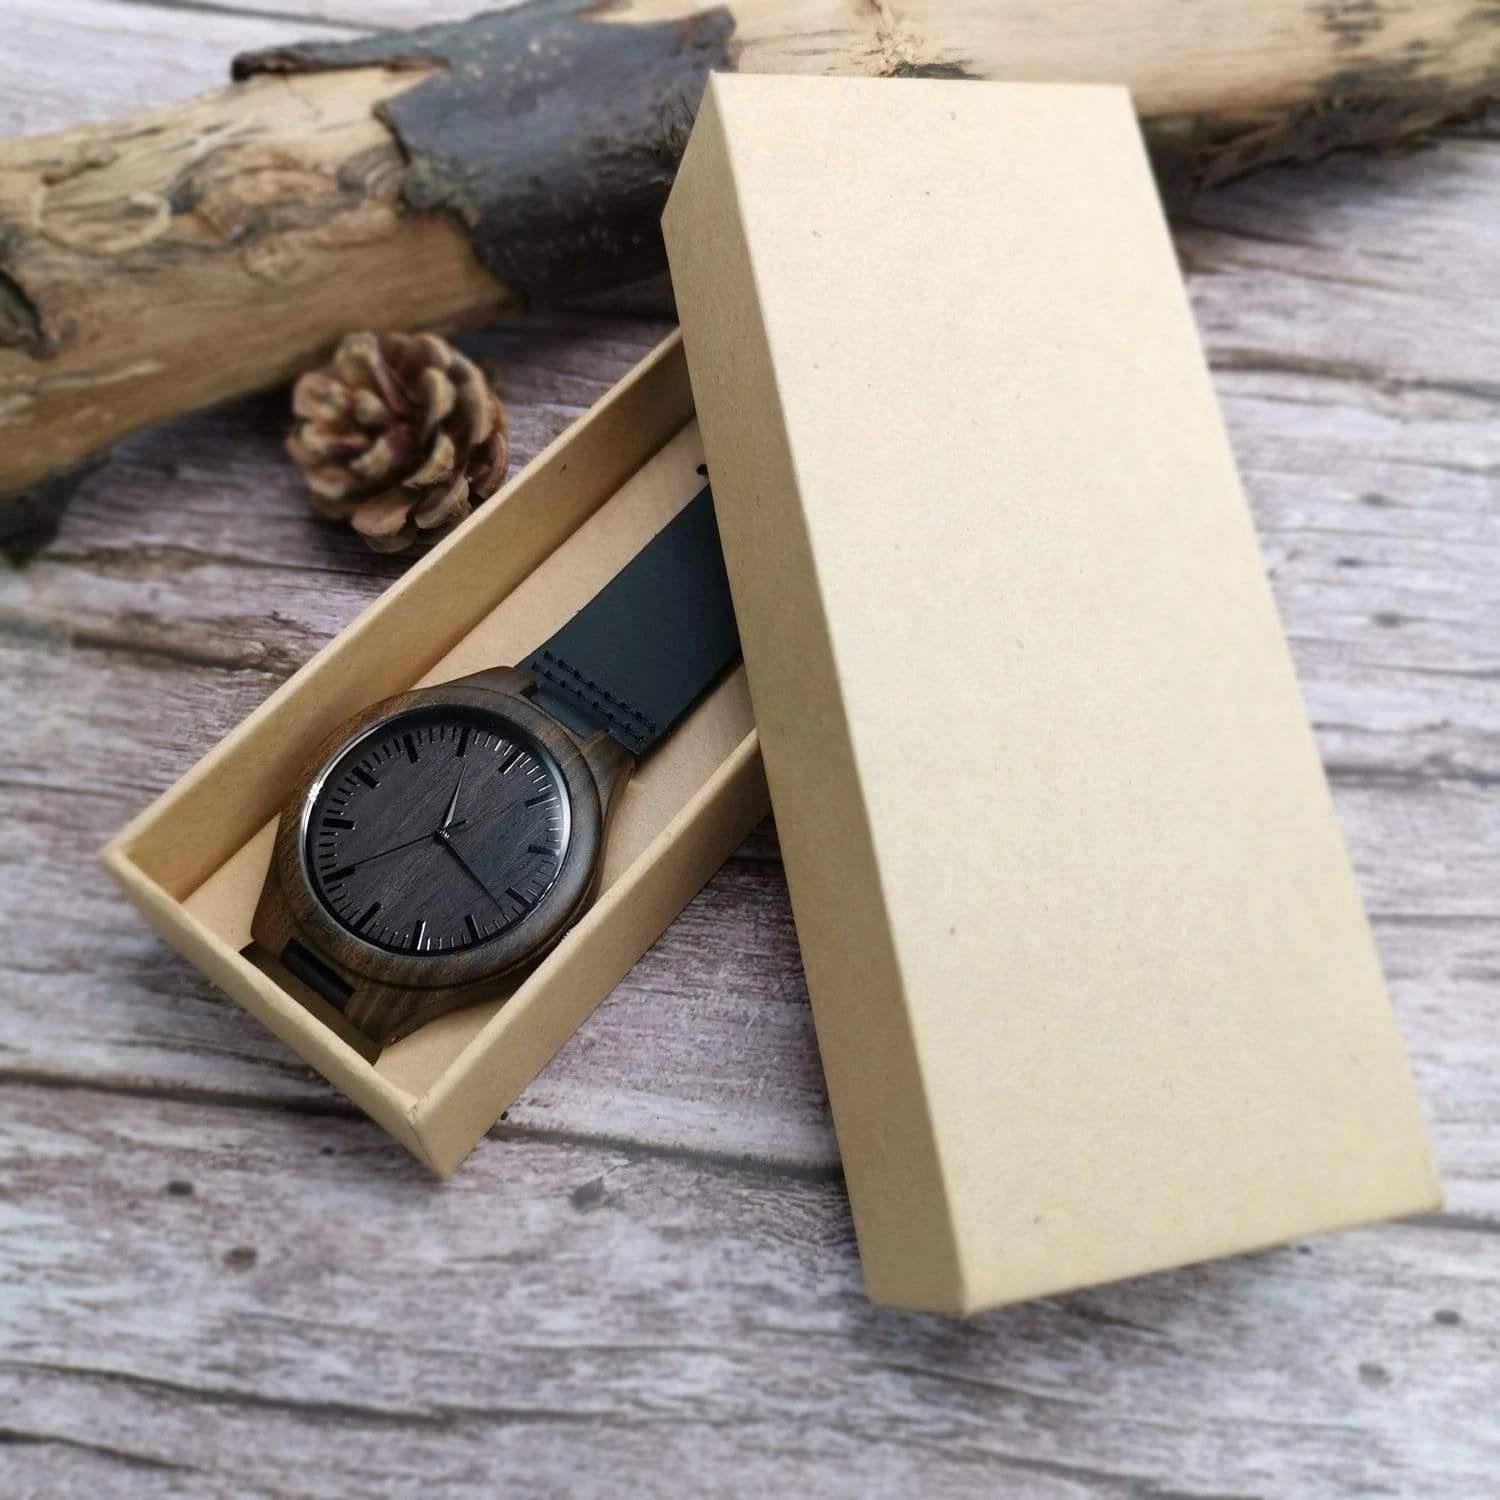 Engraved Wooden Watch Gift For Dad From Son Love You More As I Grow